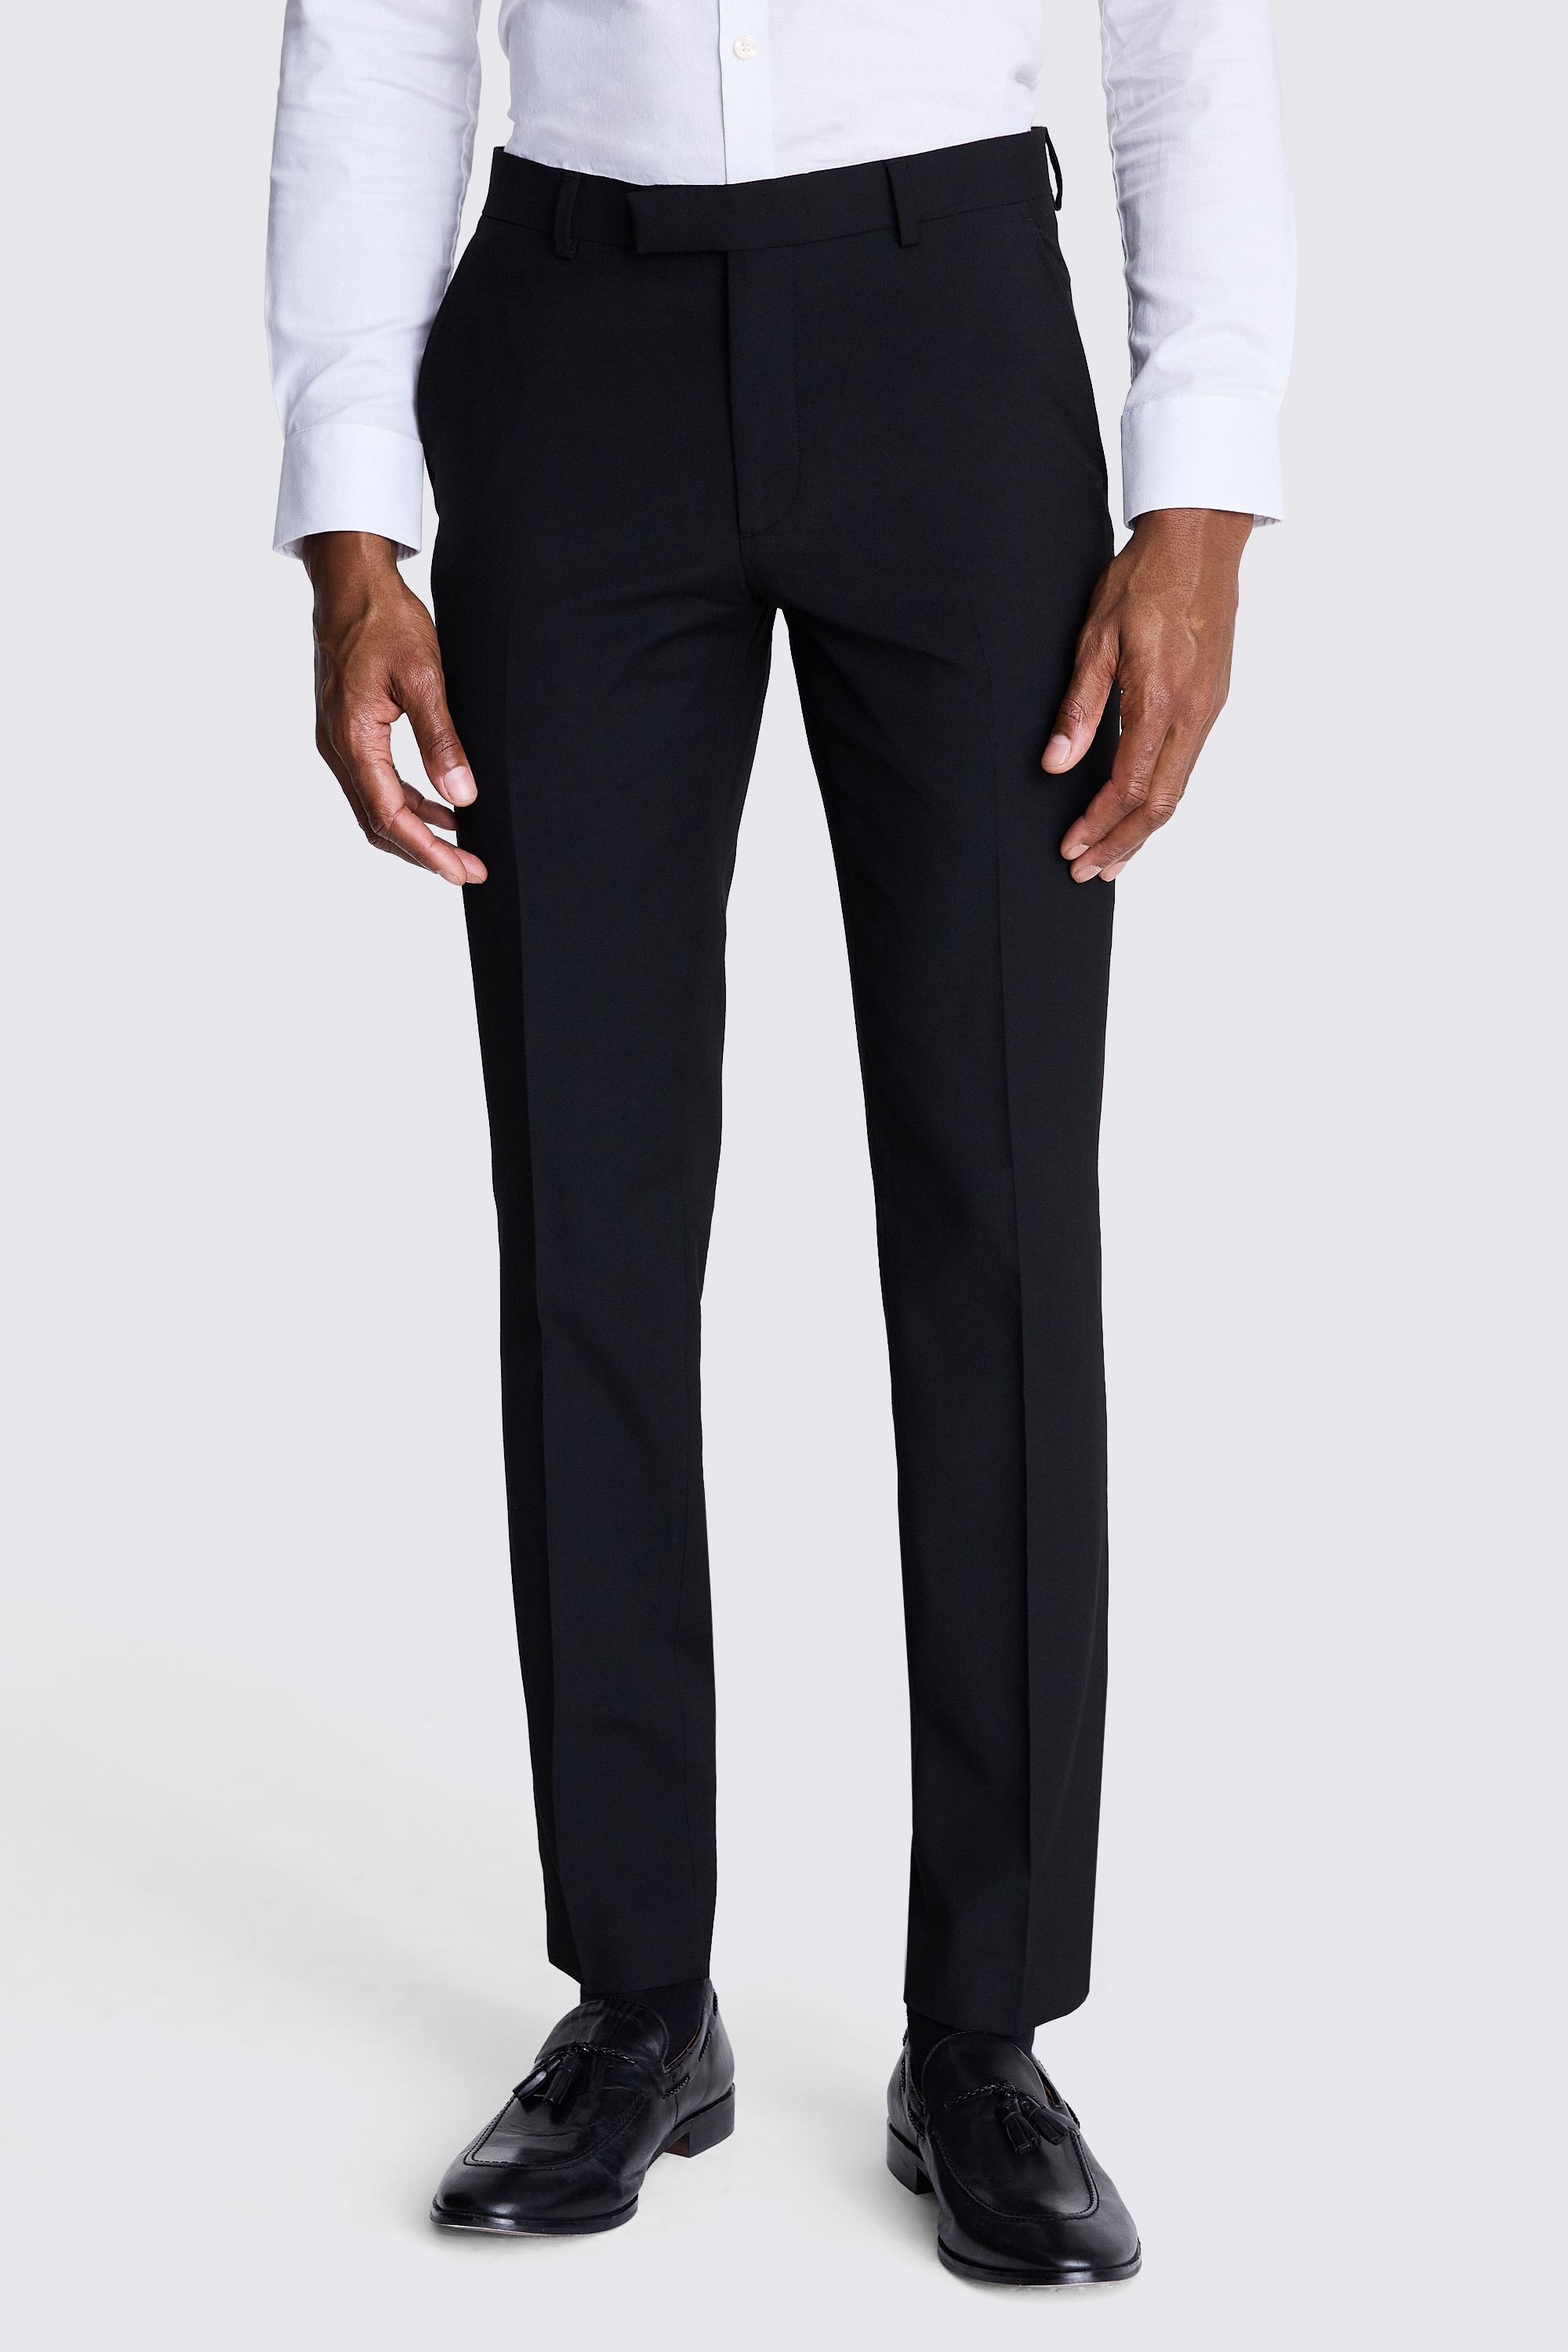 Slim Fit Black Stretch Trousers | Buy Online at Moss